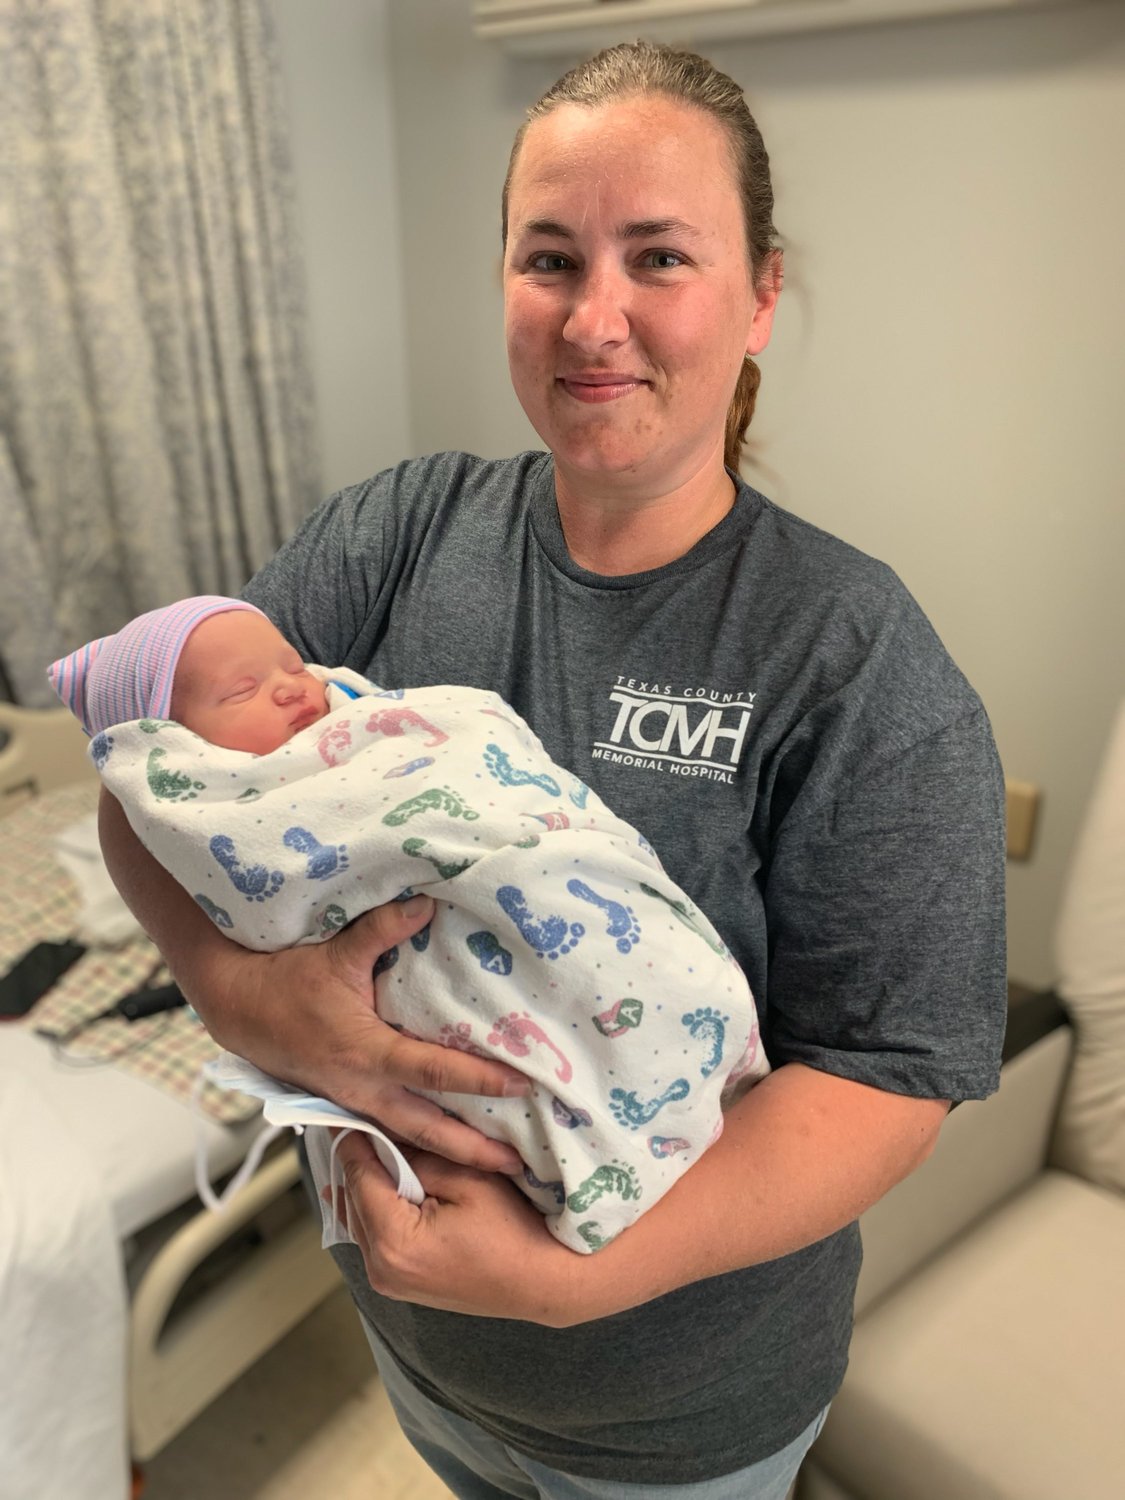 Cora Turnbull, an RN paramedic, delivered her first baby, in the backseat of a car.